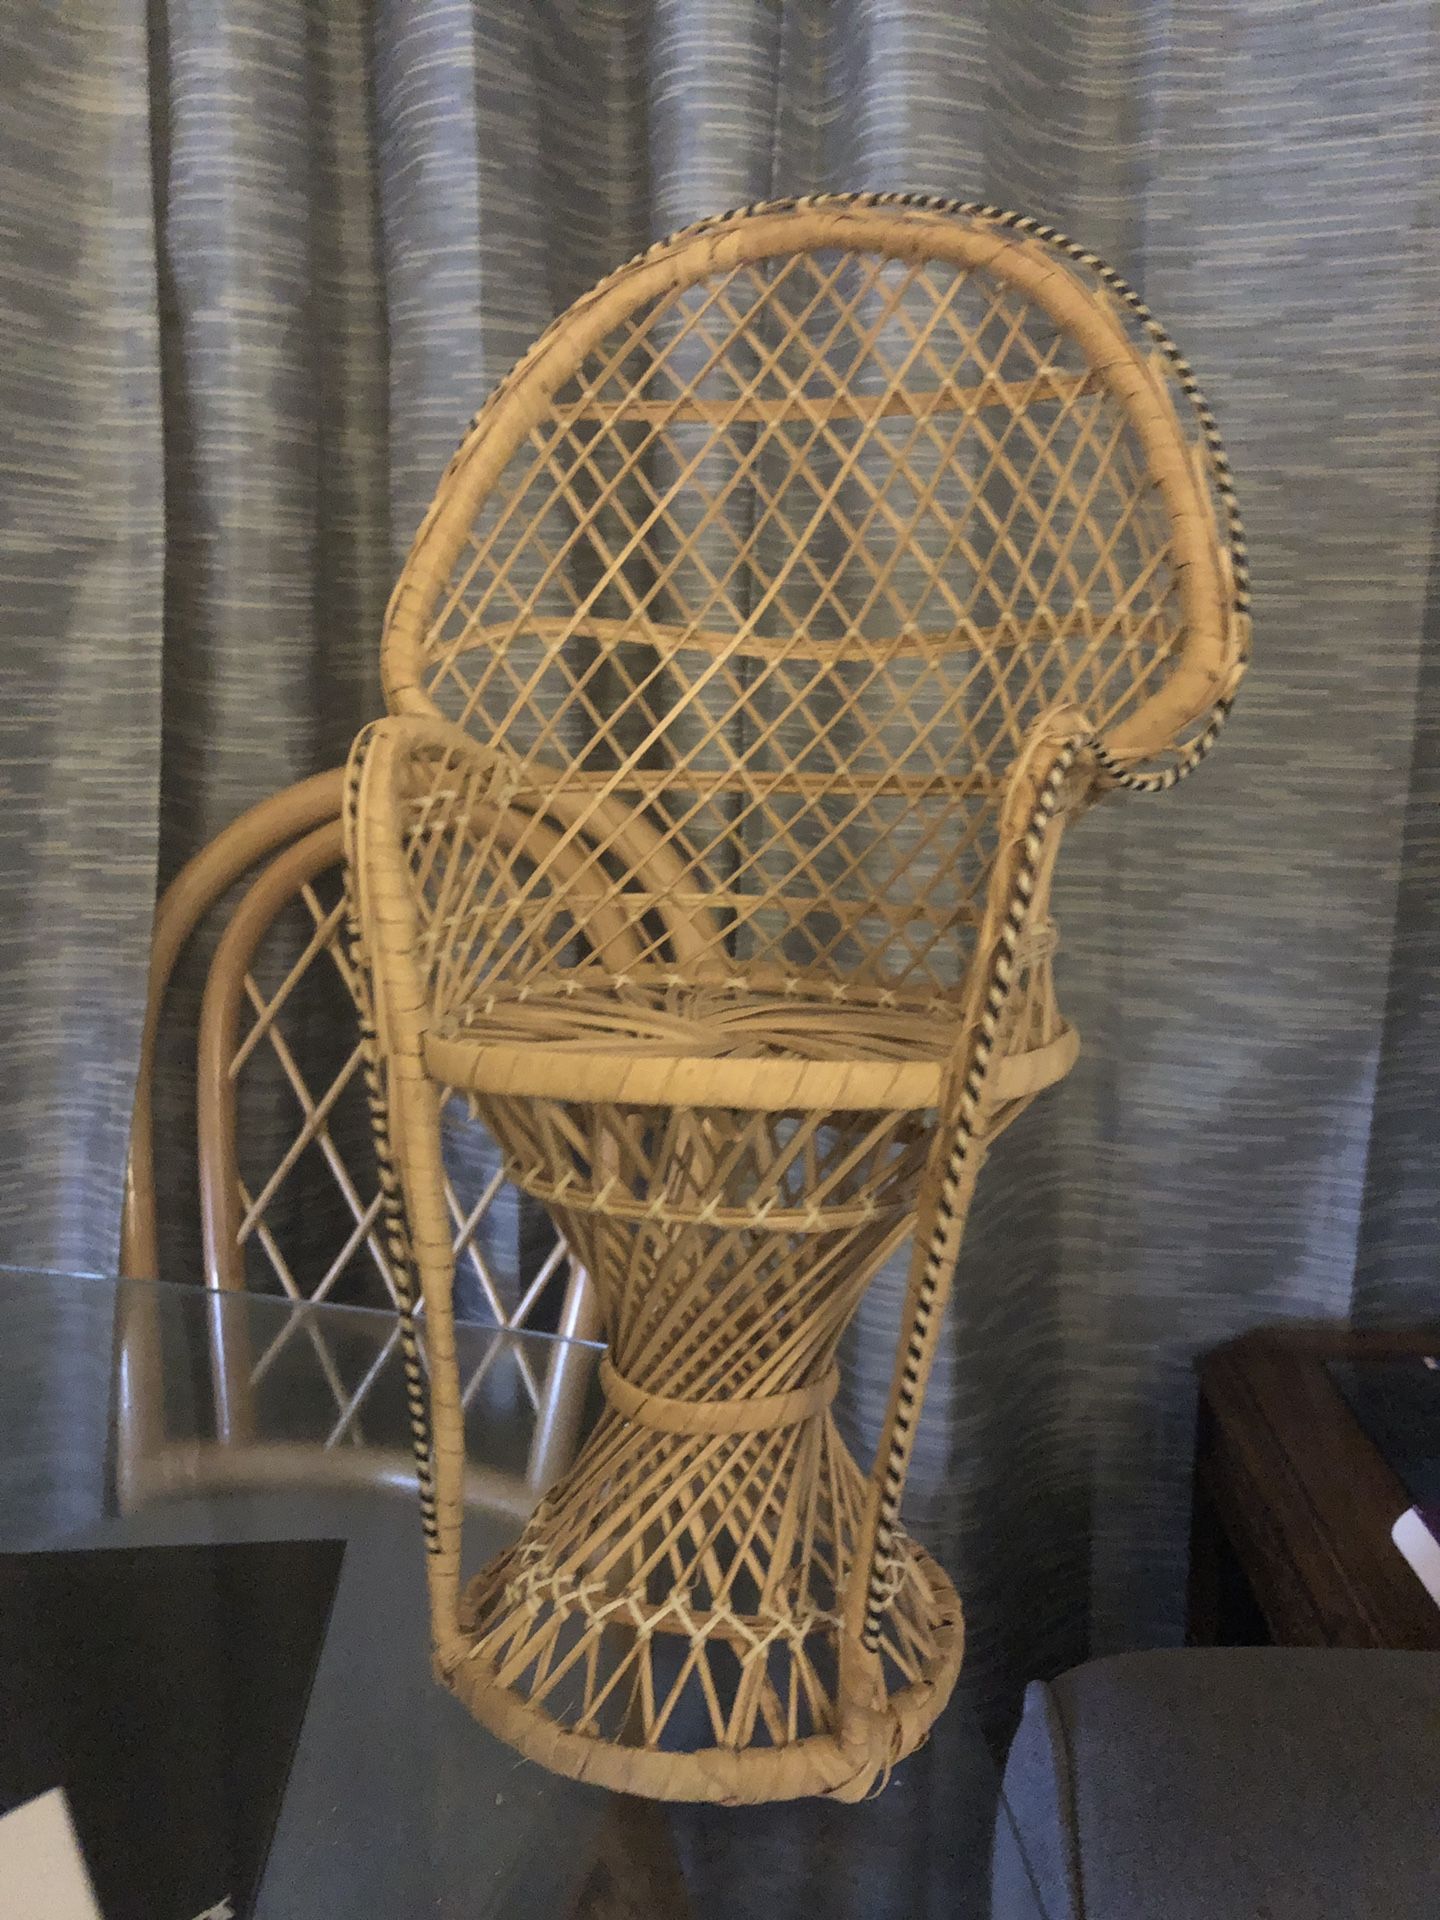 Wicker chair for doll or stuffed animal